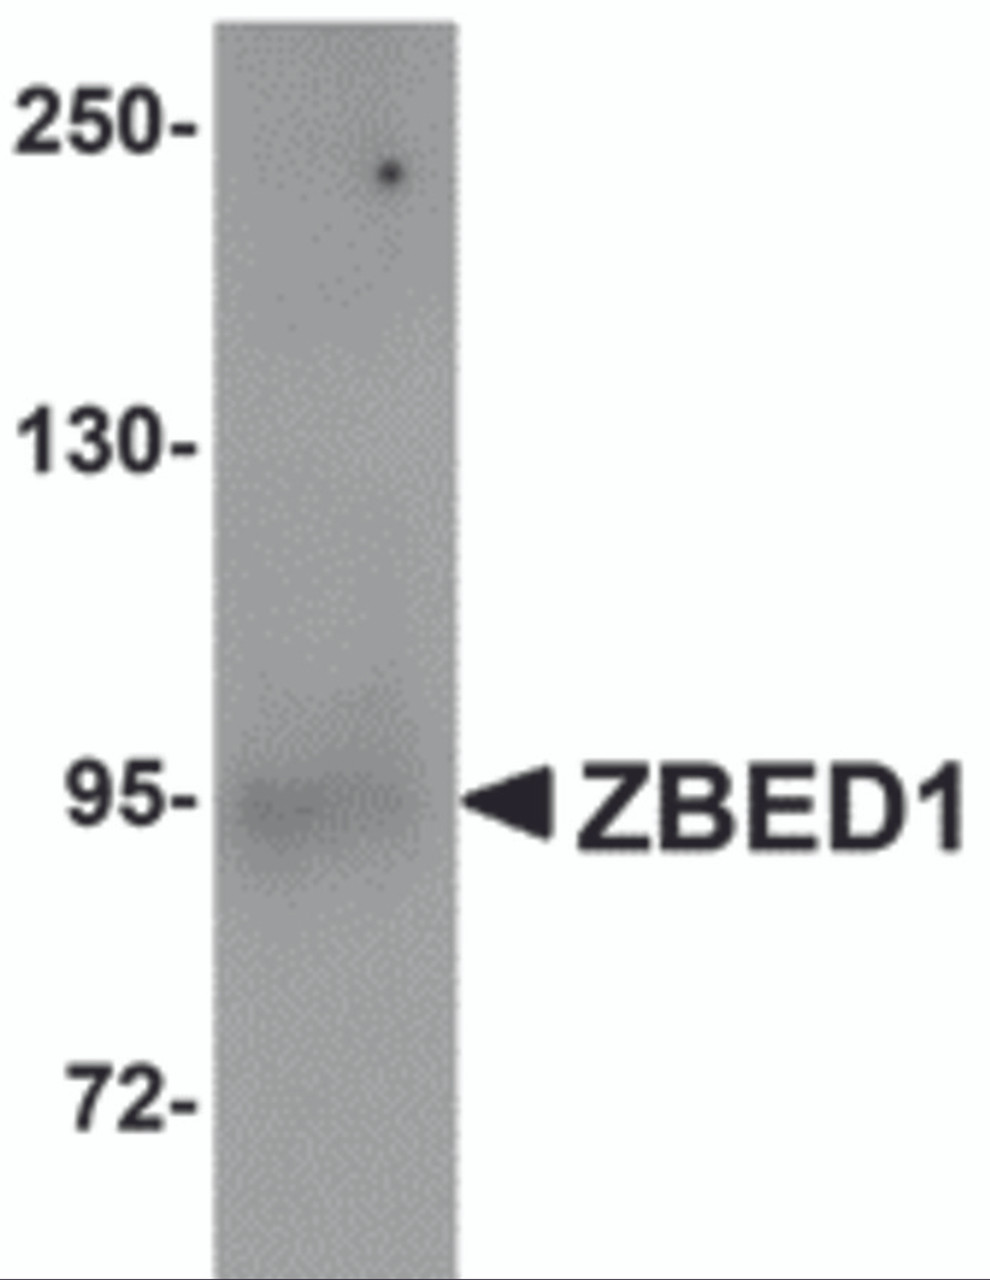 Western blot analysis of ZBED1 in A549 cell lysate with ZBED1 antibody at 1 &#956;g/mL.